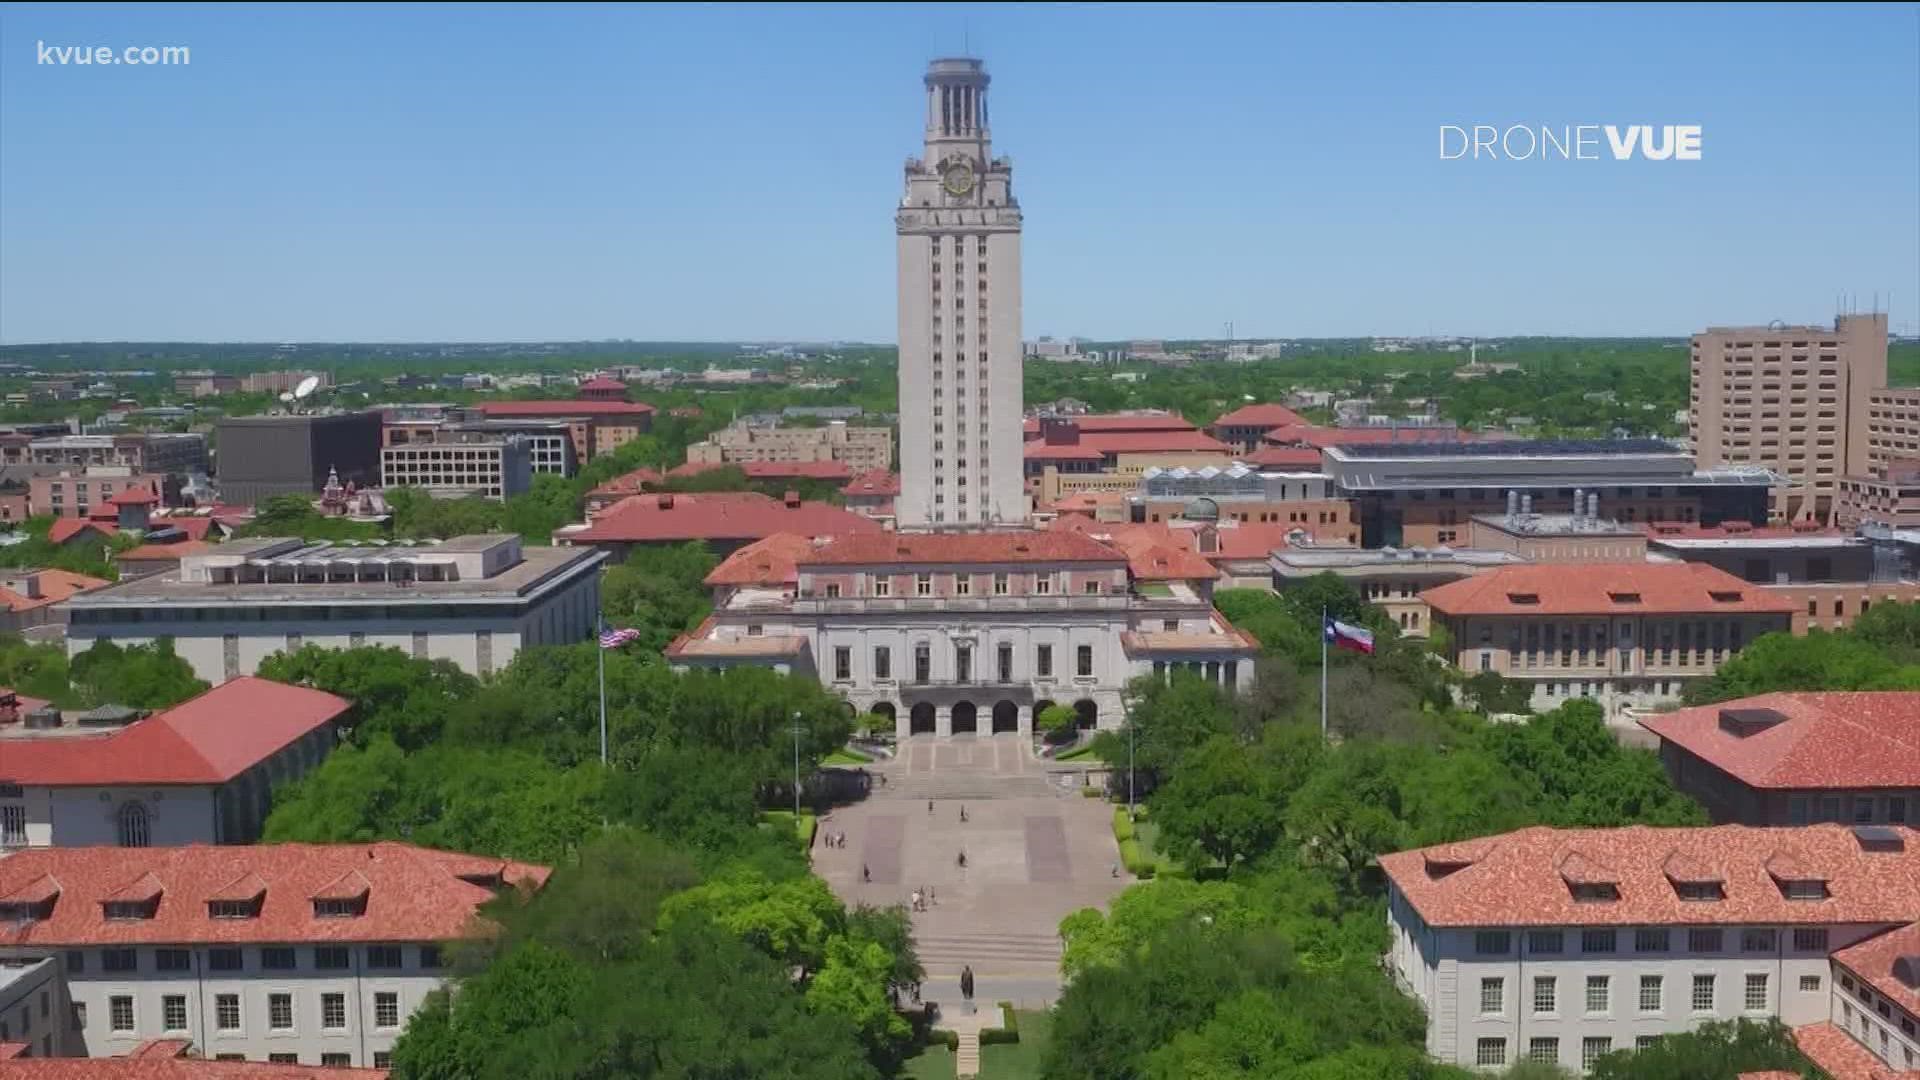 The University of Texas is one of the top 50 universities in the world, according to the U.S. News and World Report.